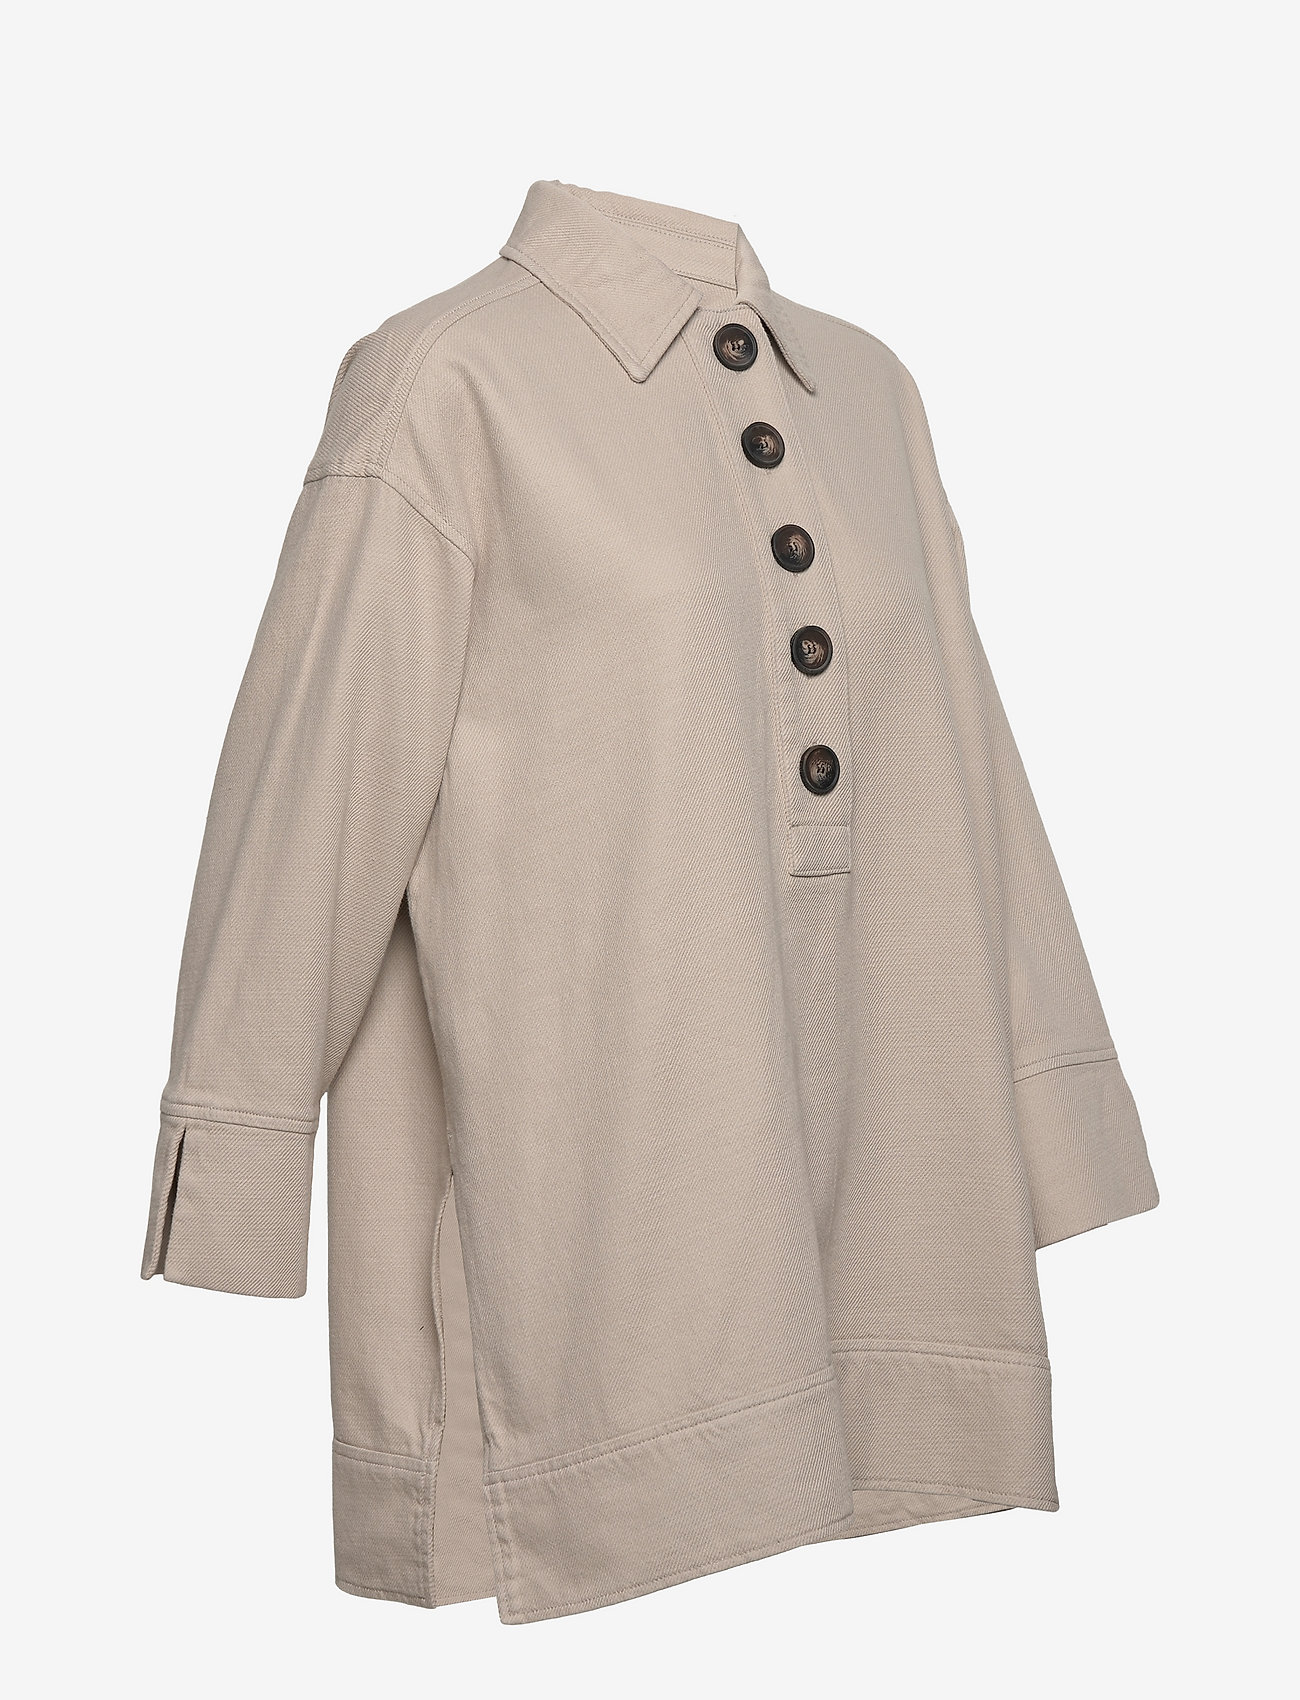 By Malene Birger - FLAYWOOD - t-paidat & topit - oyster gray - 2